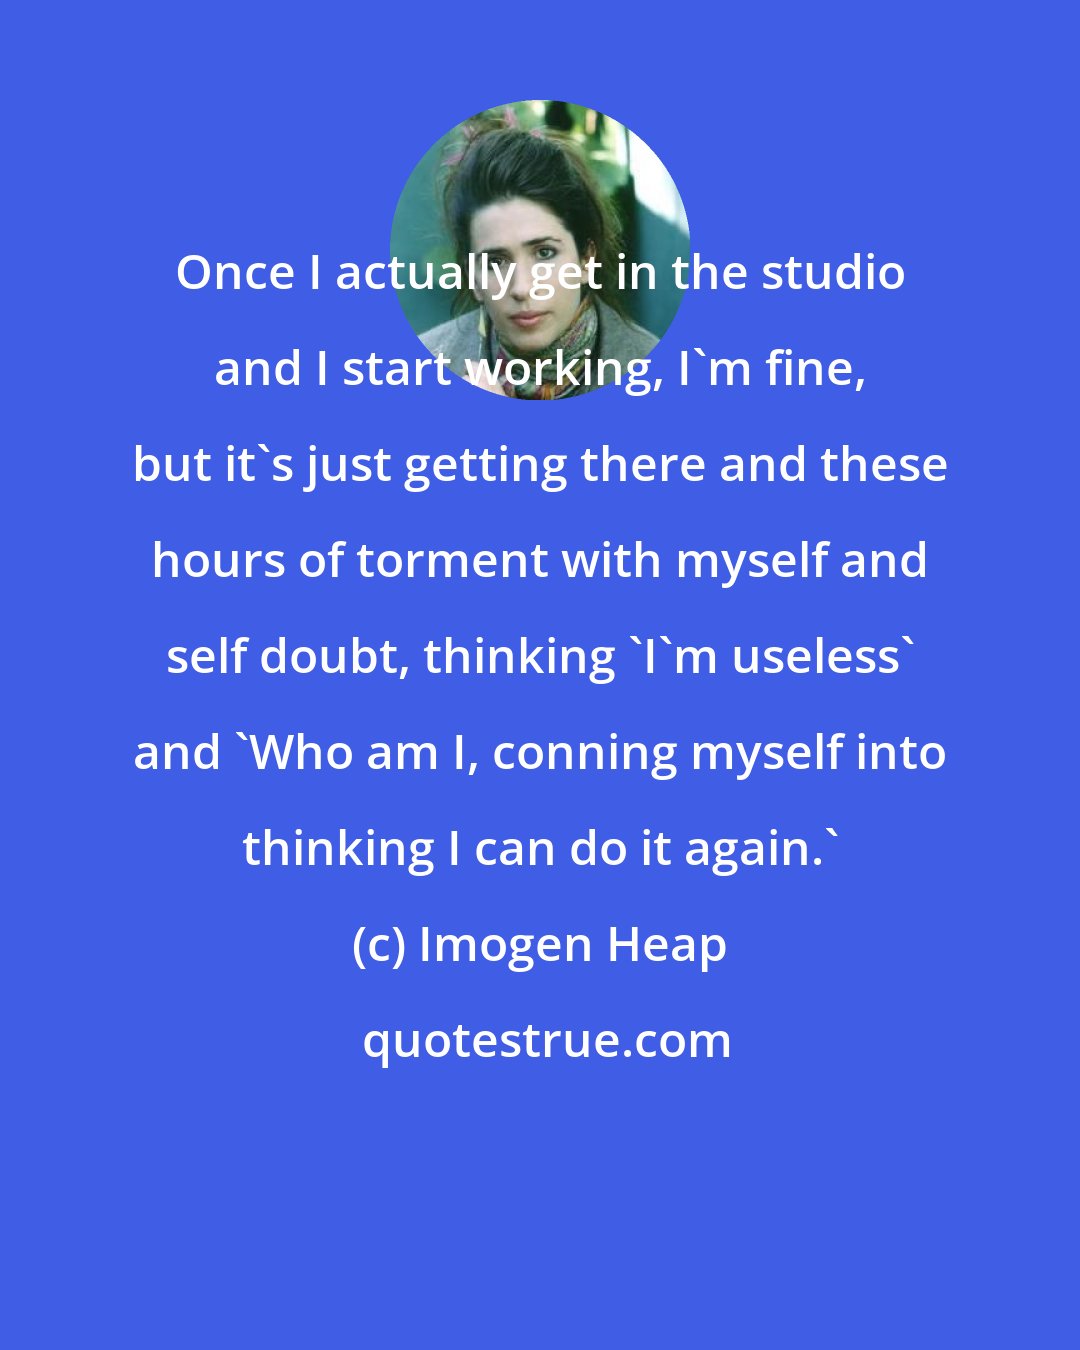 Imogen Heap: Once I actually get in the studio and I start working, I'm fine, but it's just getting there and these hours of torment with myself and self doubt, thinking 'I'm useless' and 'Who am I, conning myself into thinking I can do it again.'